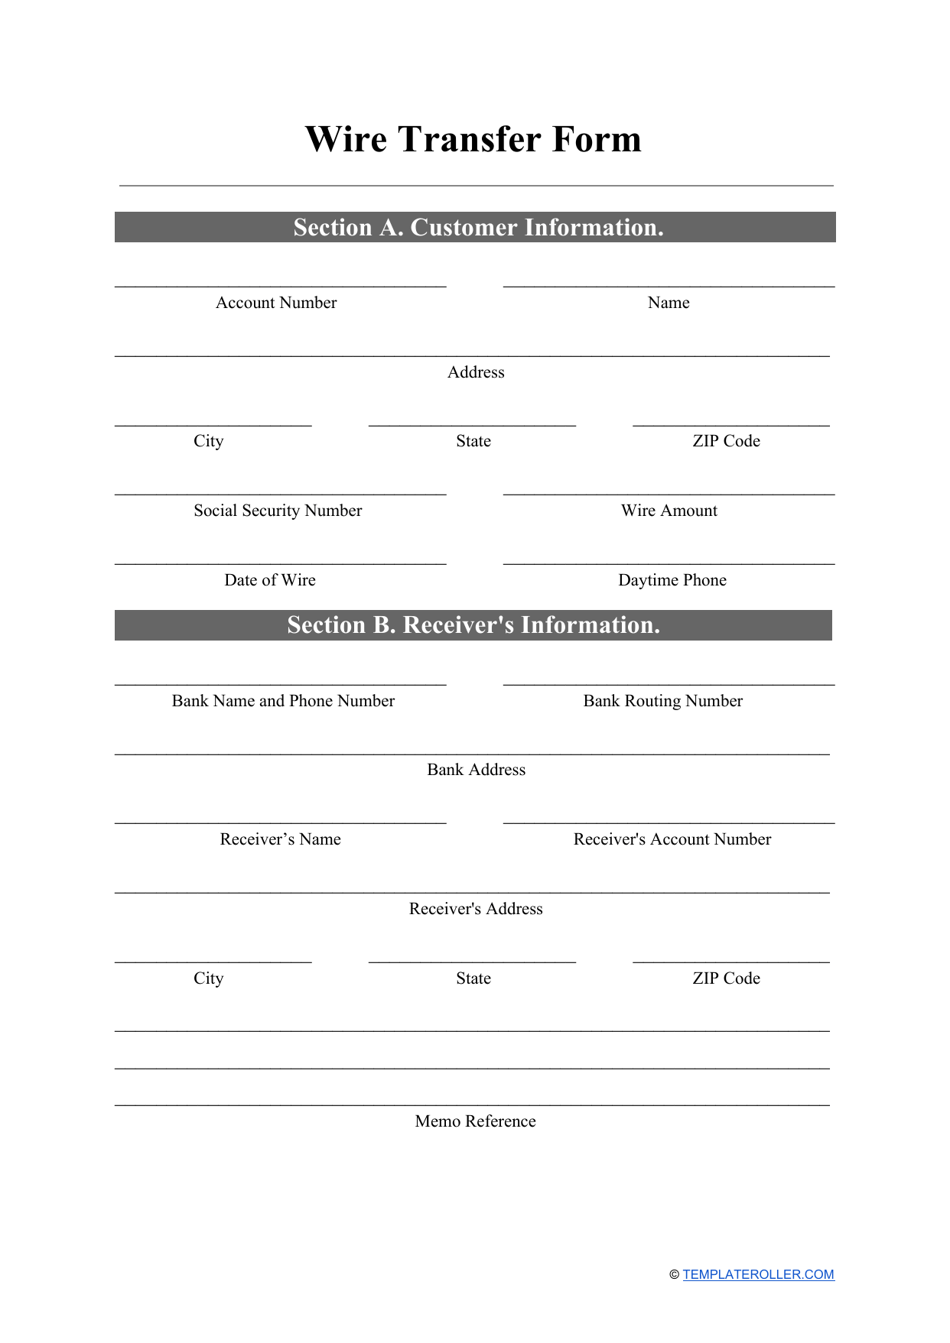 Wire Transfer Form, Page 1